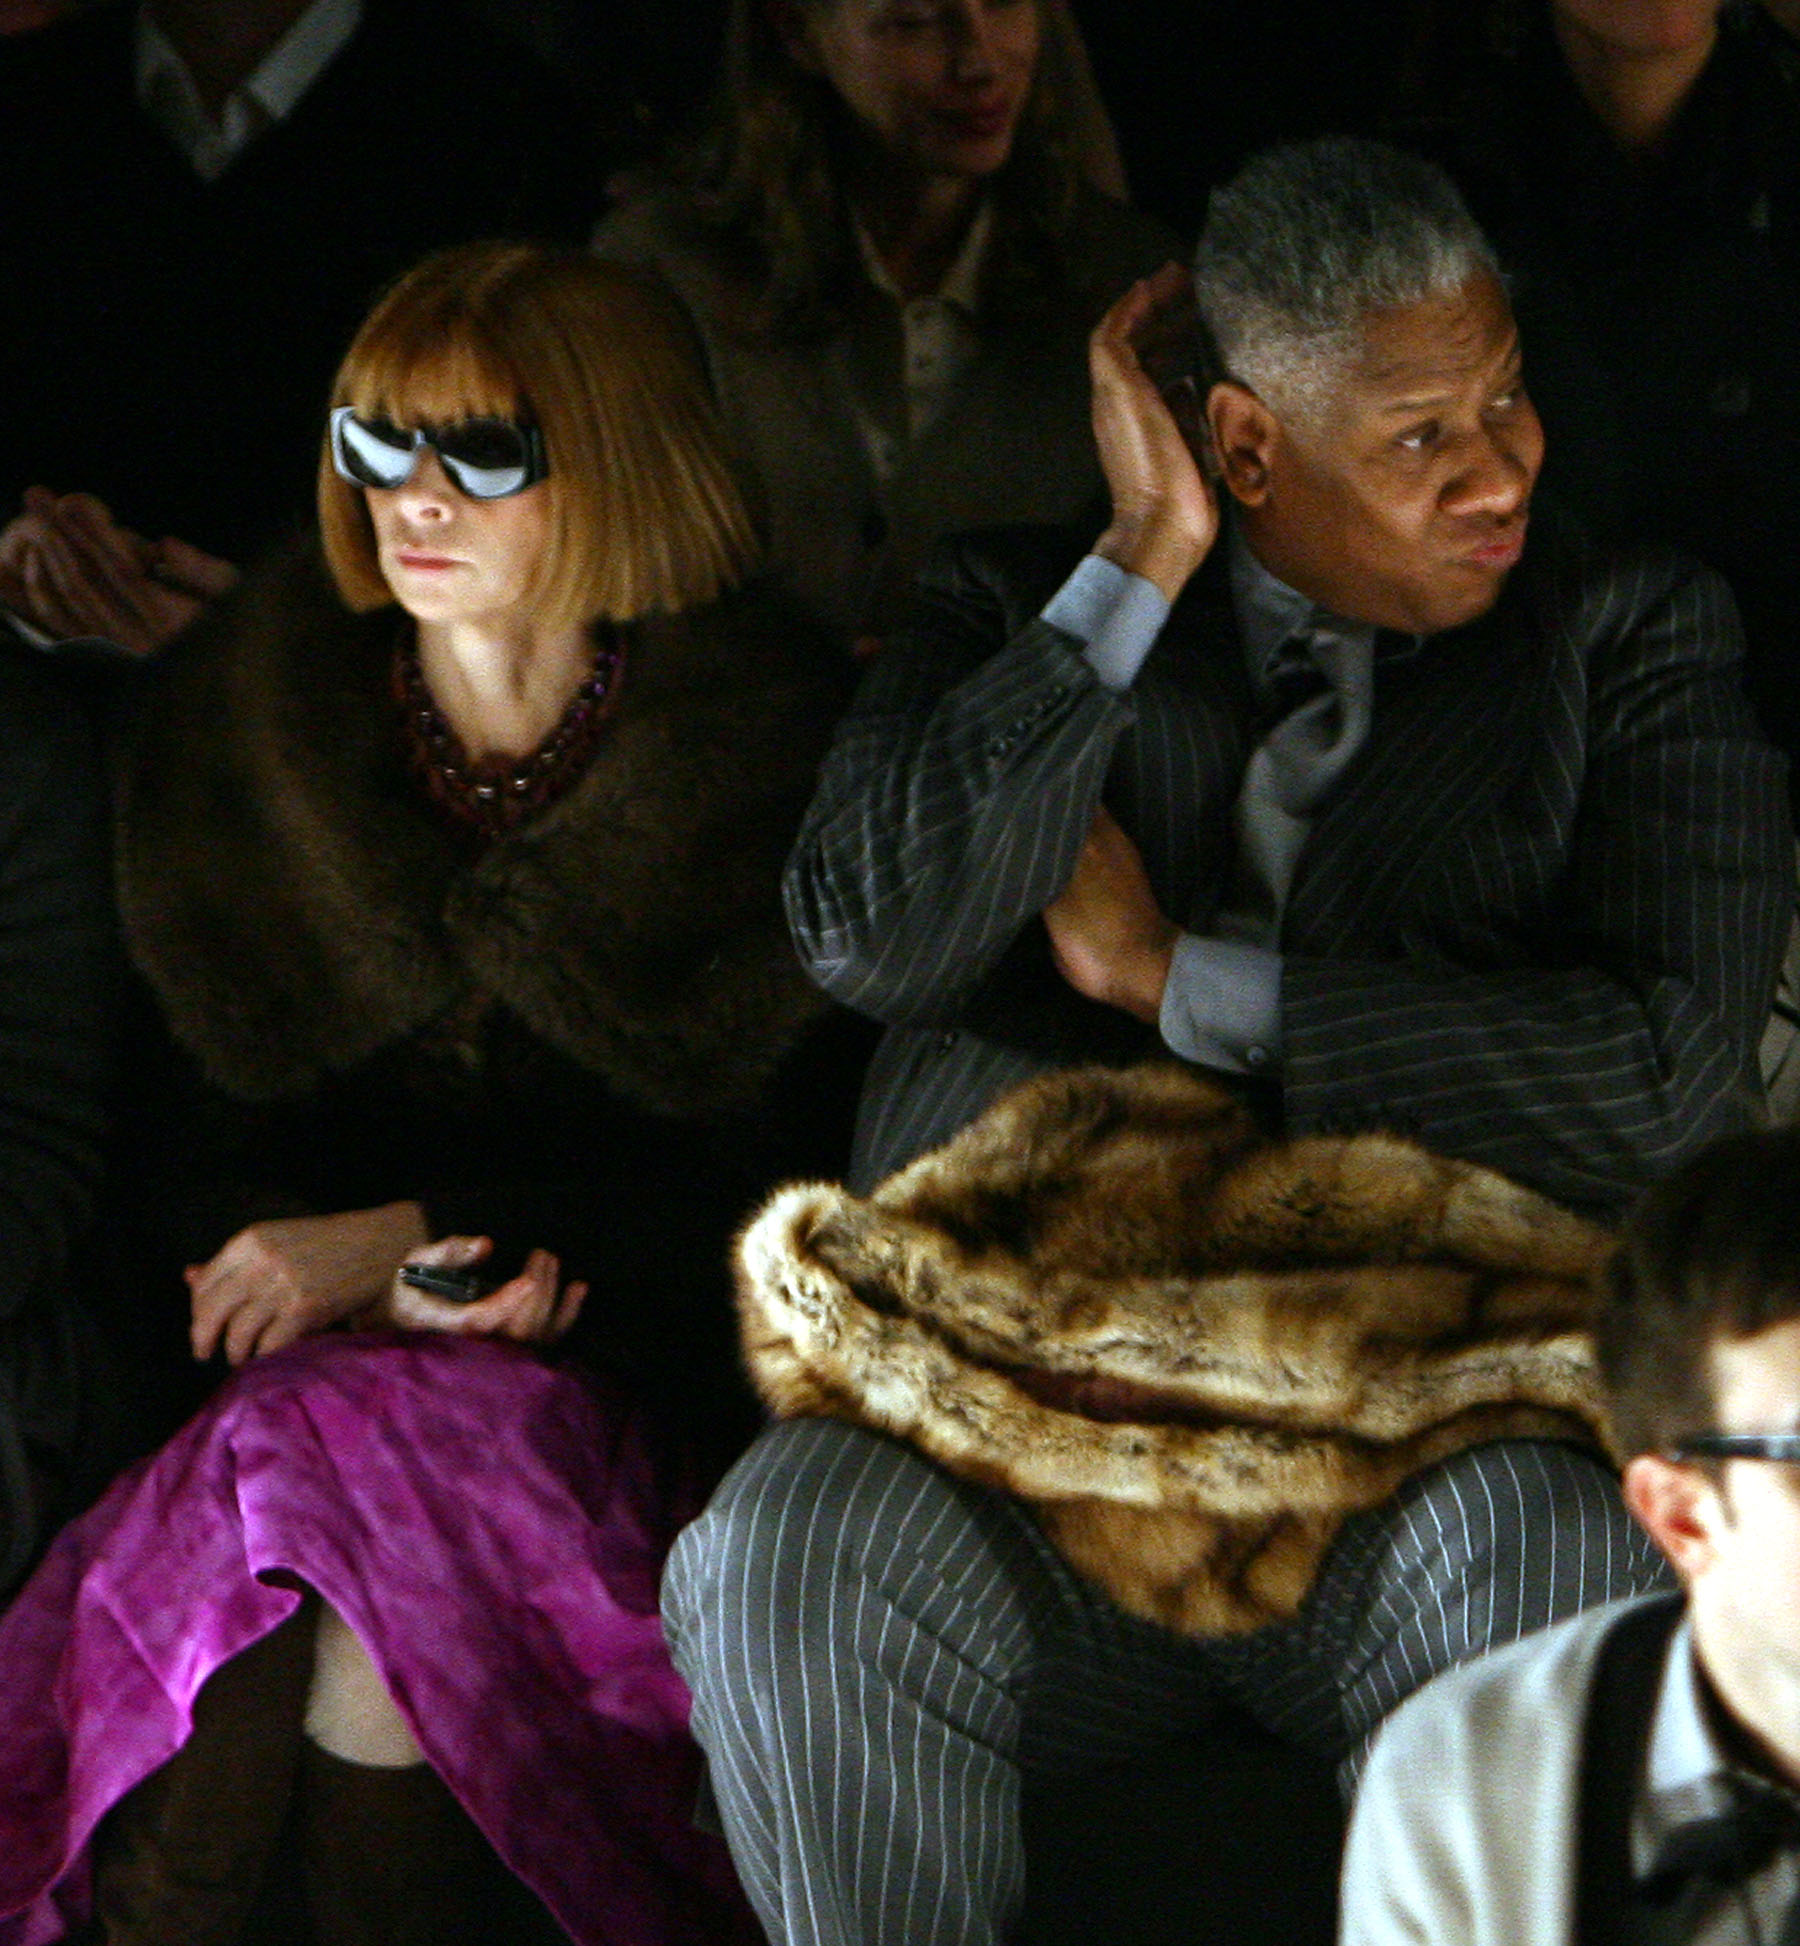 Anna Wintour and André Leon Talley